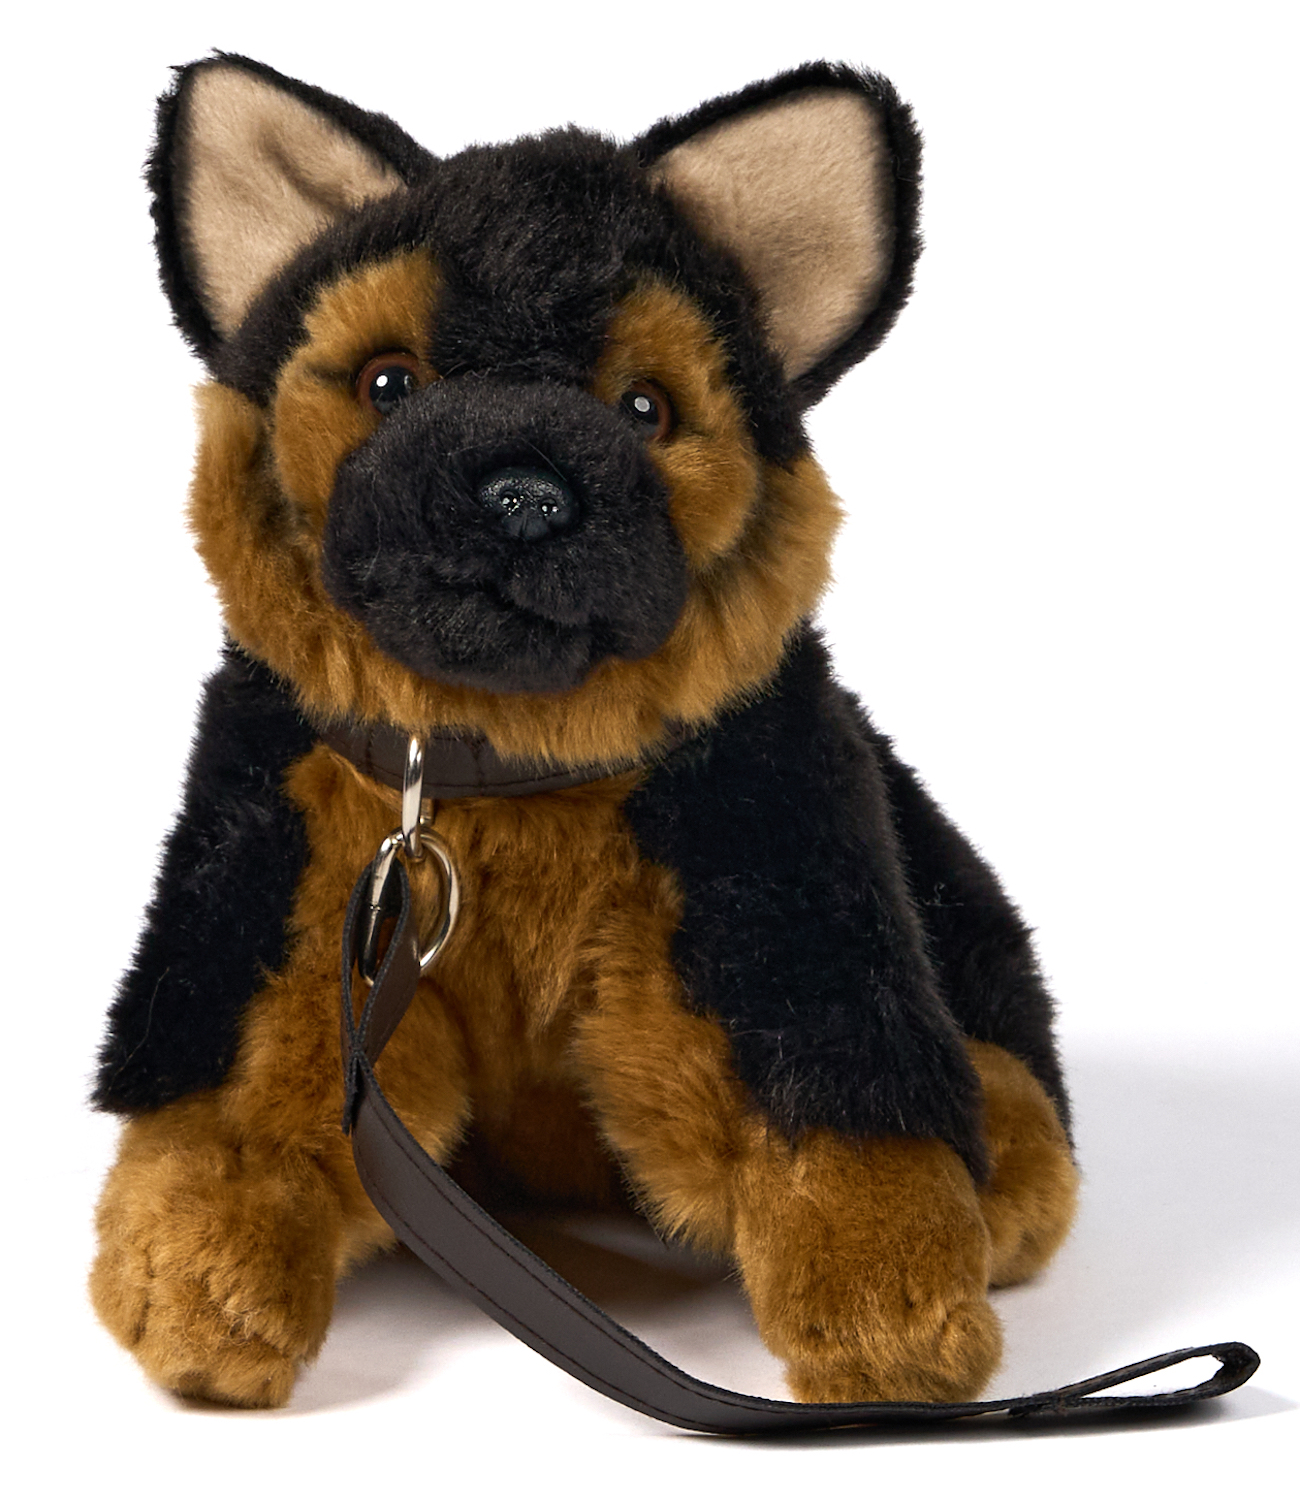 German shepherd puppy, sitting - With leash and voice (sound) - 18 cm (height)